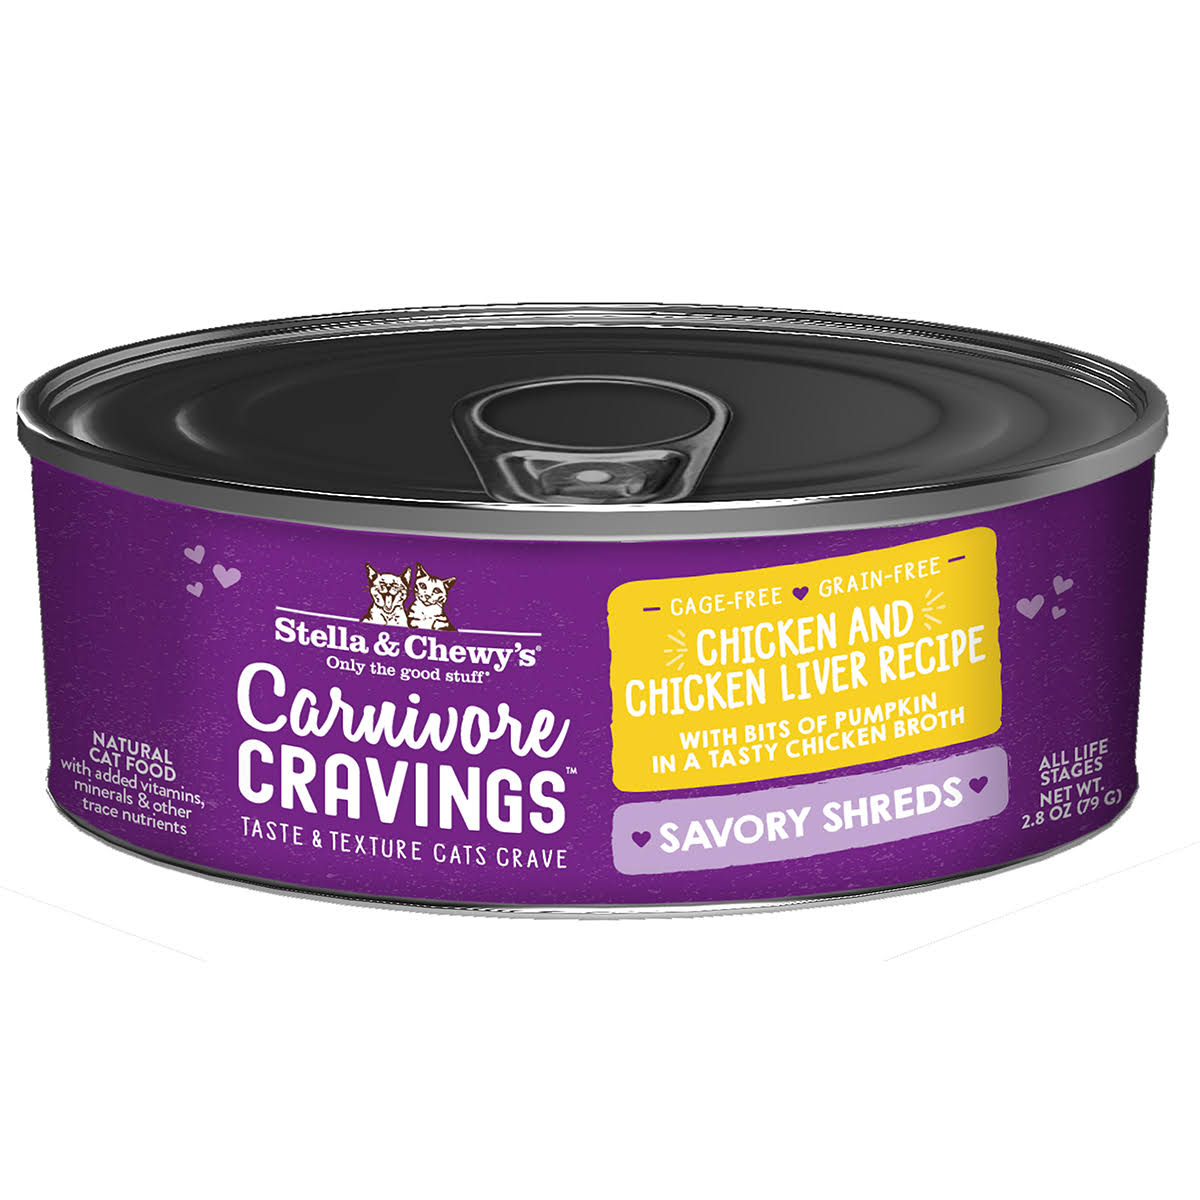 Stella & Chewy's 2.8oz Carnivore Cravings Chicken & Liver Shreds